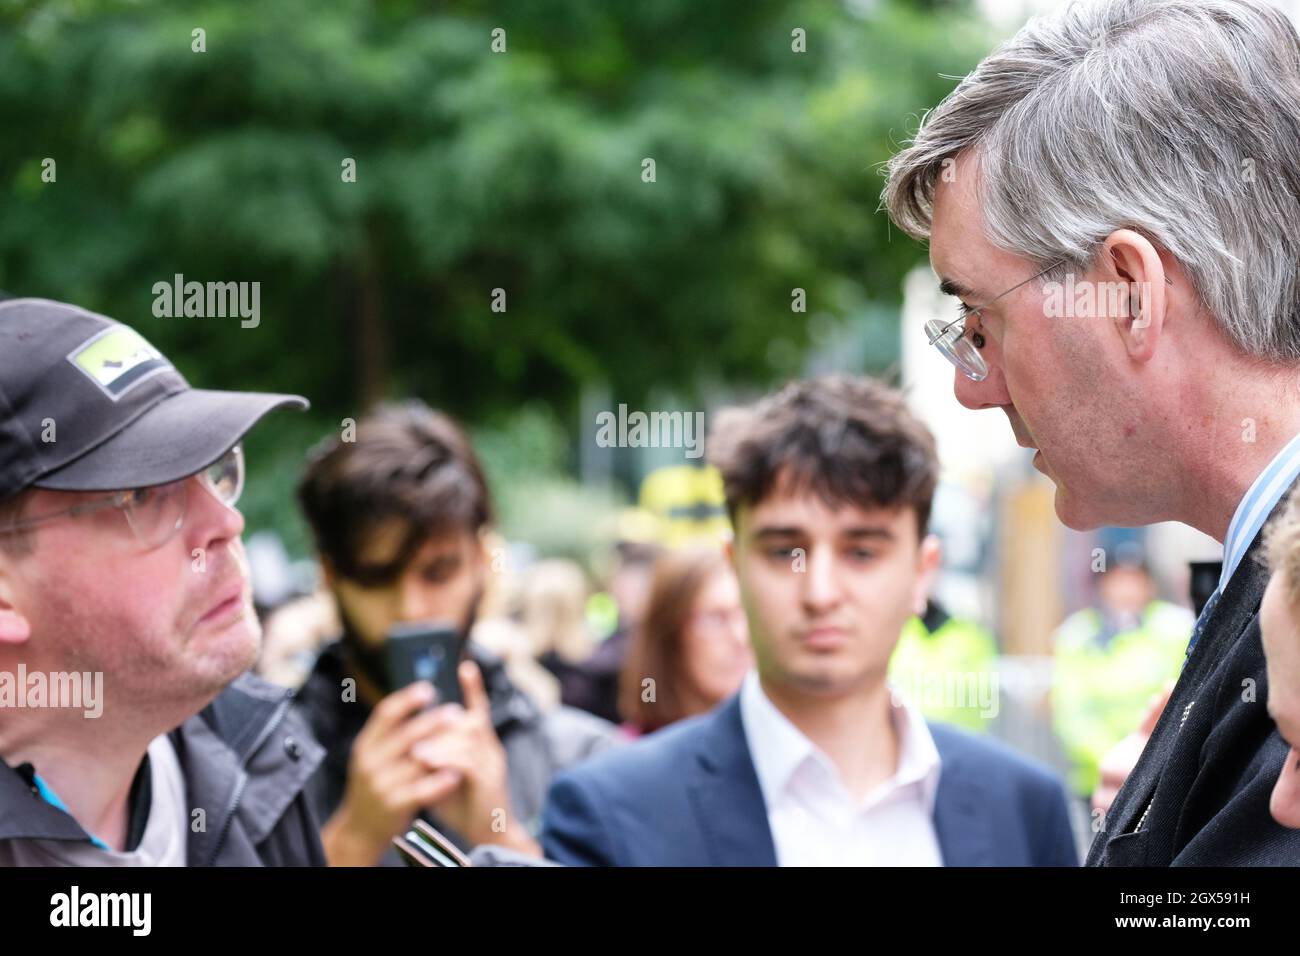 Manchester, UK – Monday 4th October 2021 – Conservative MP Jacob Rees-Mogg speaks to a disabled man who says he lost his job because of the Tories - outside the Conservative Party Conference in Manchester. Photo Steven May / Alamy Live News Stock Photo